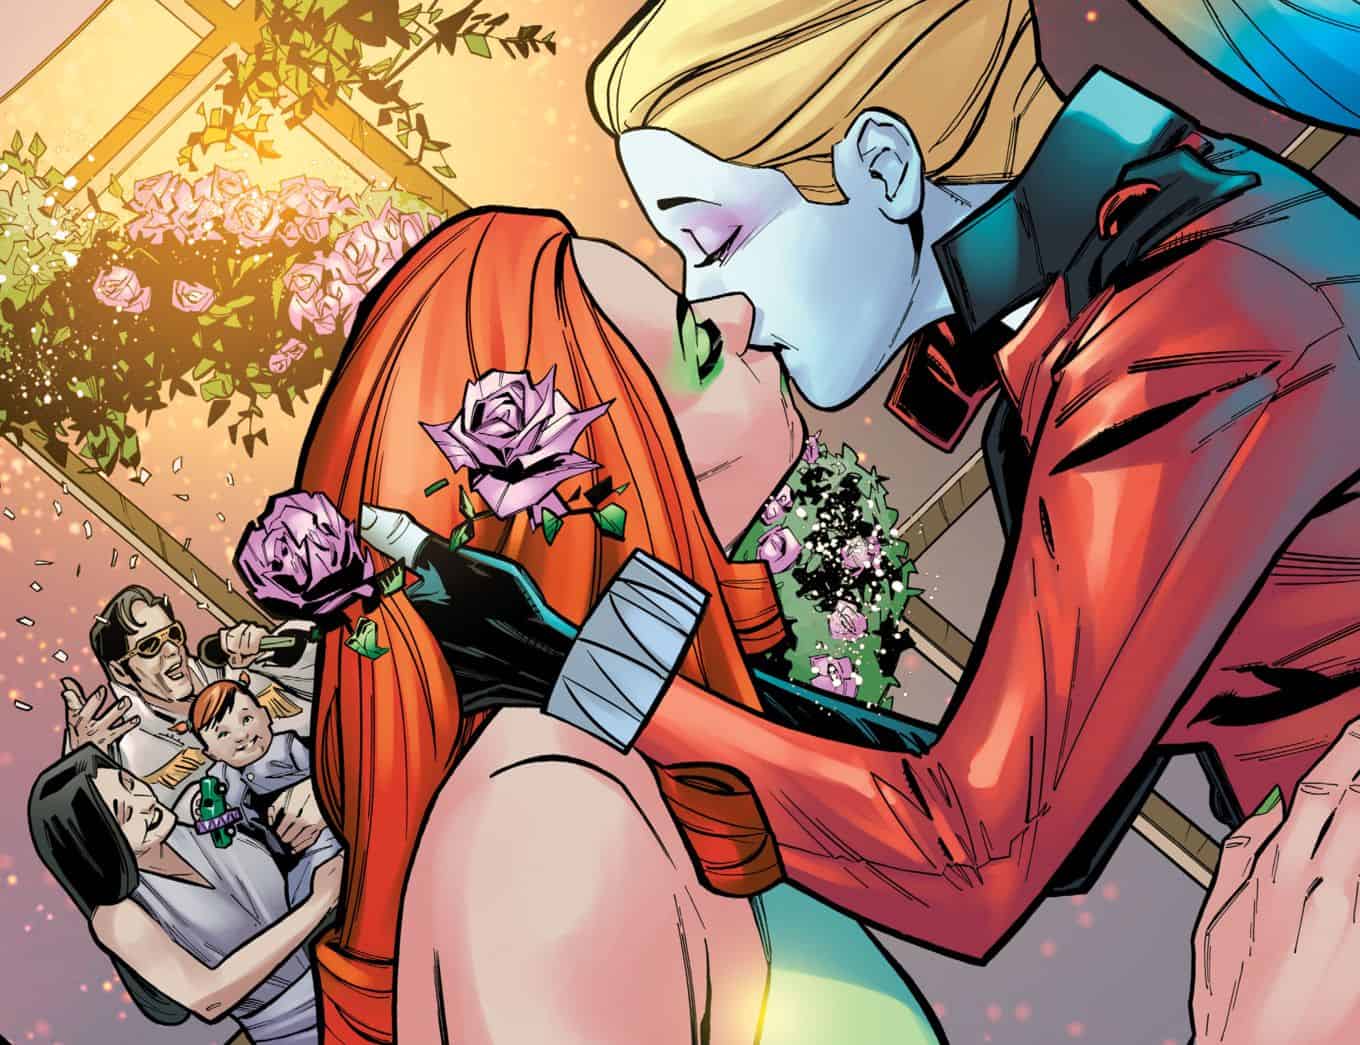 DC Comics & Injustice Year Zero #8 Spoilers & Review: All About Har...